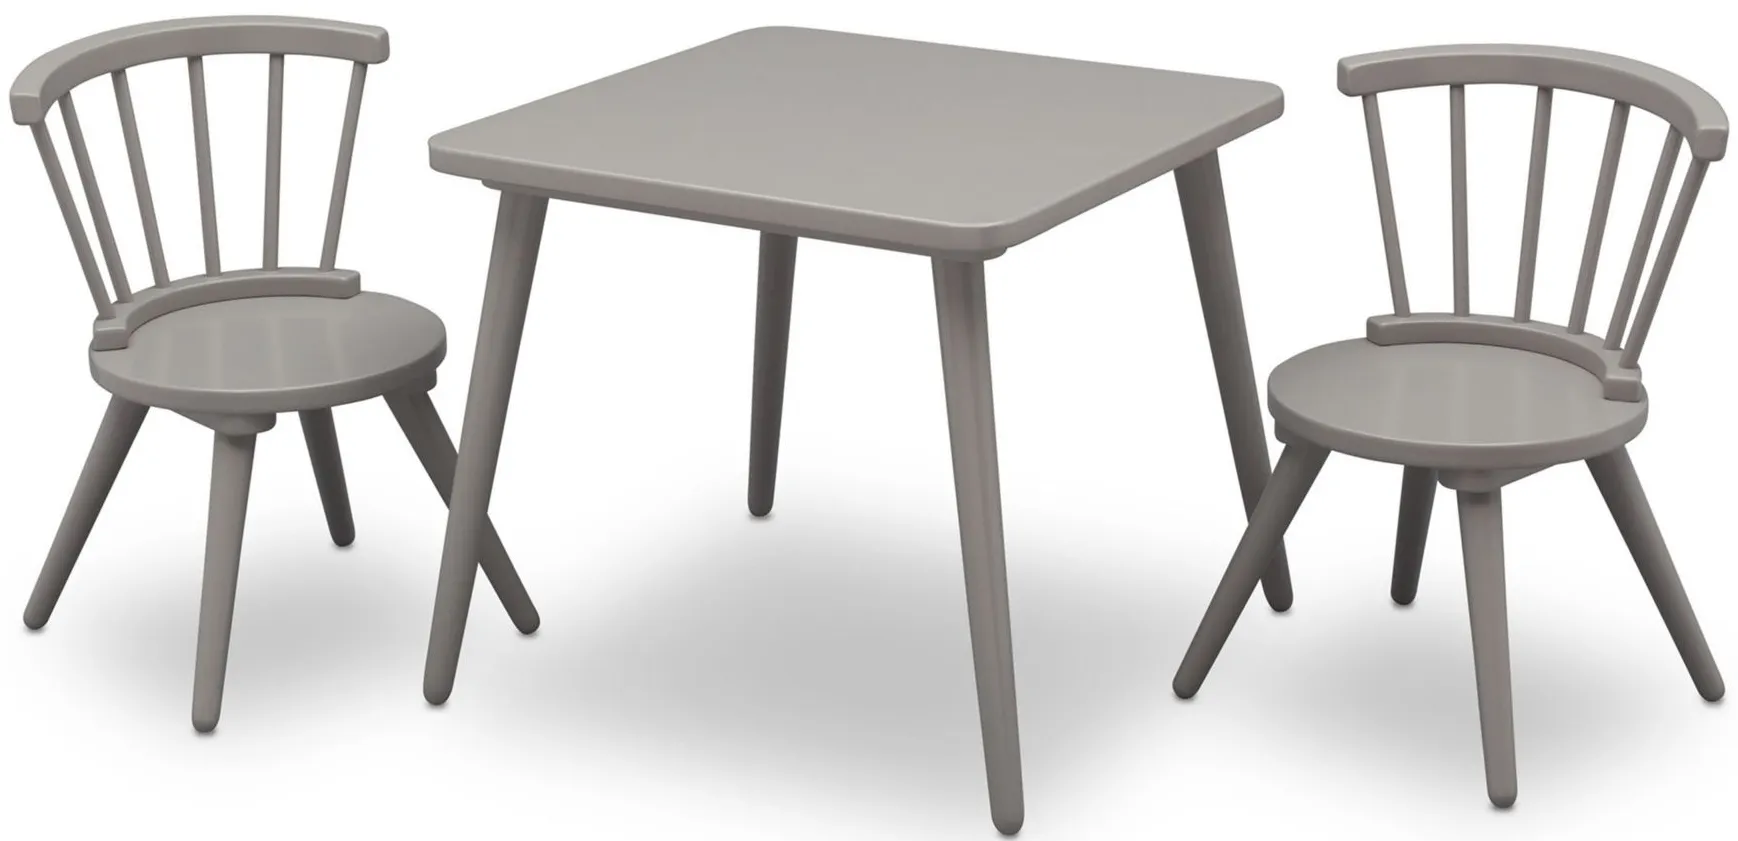 Windsor Kids Wood Table and Chair Set by Delta Children in Gray by Delta Children